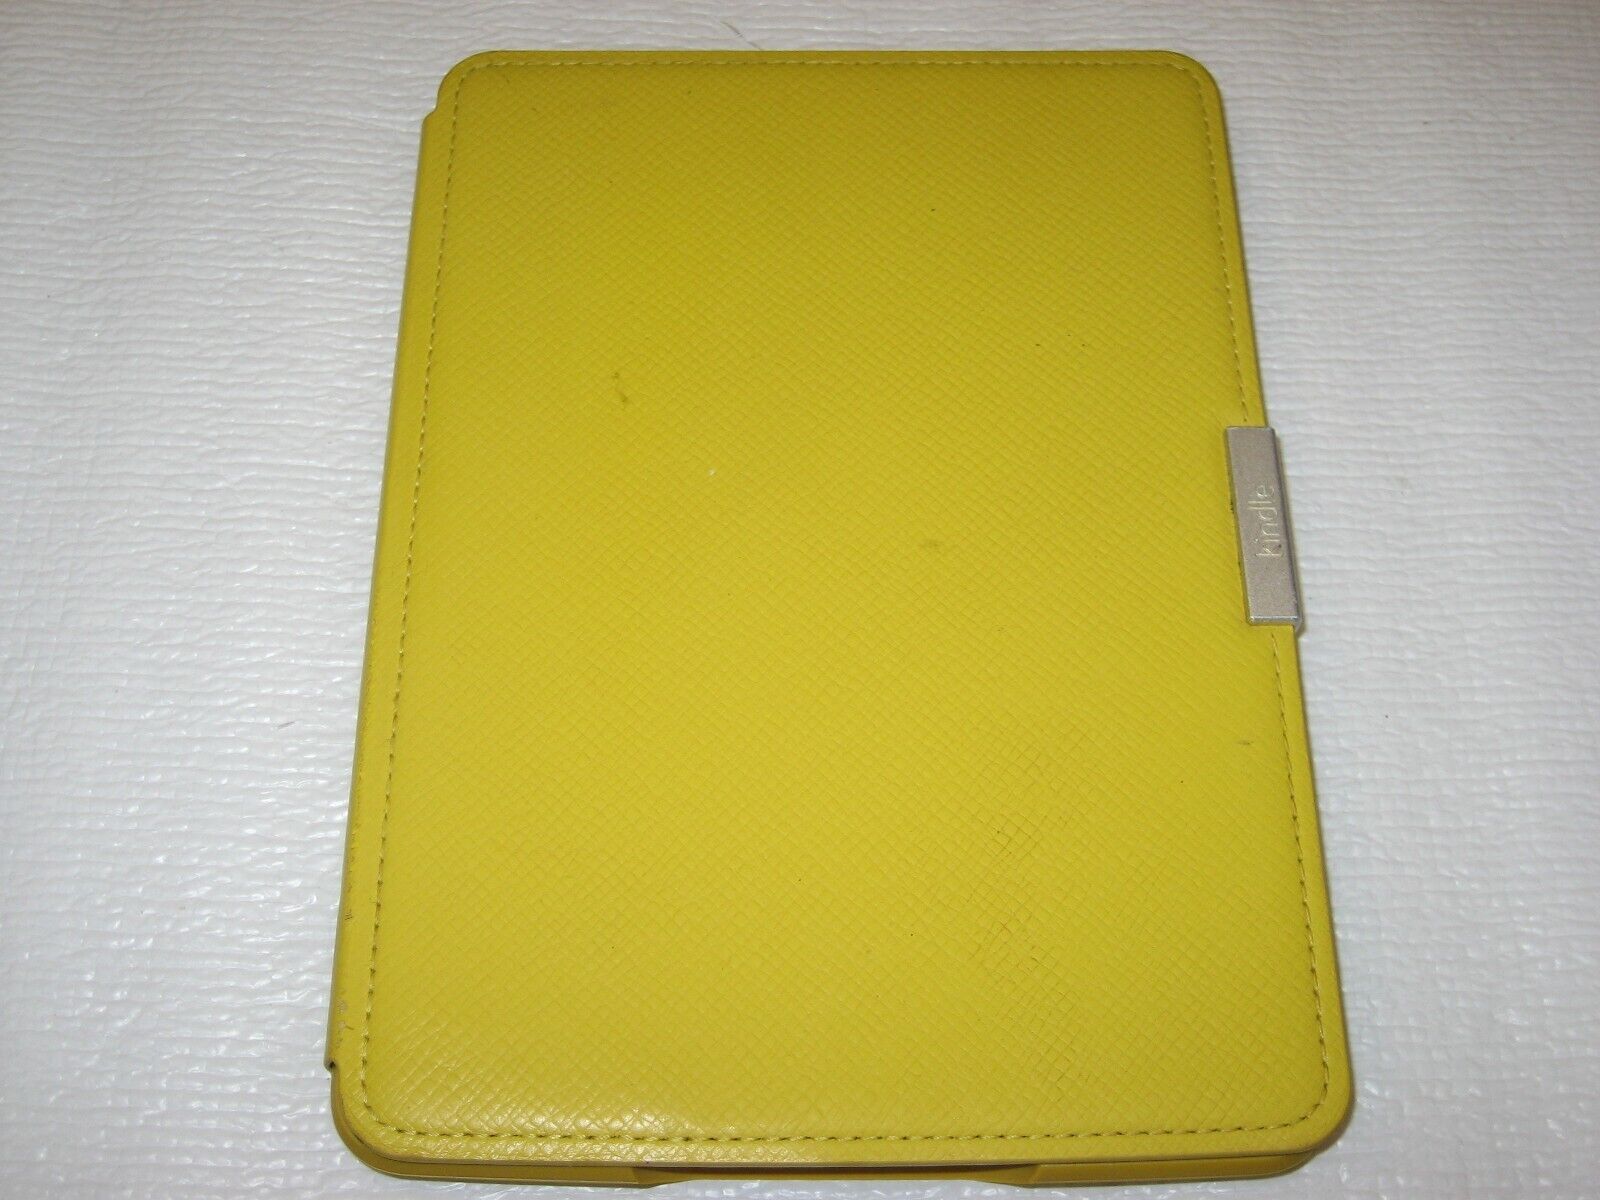 Original Amazon Leather Cover Case for Kindle Paperwhite 5th,6th, 7th Gen Yellow